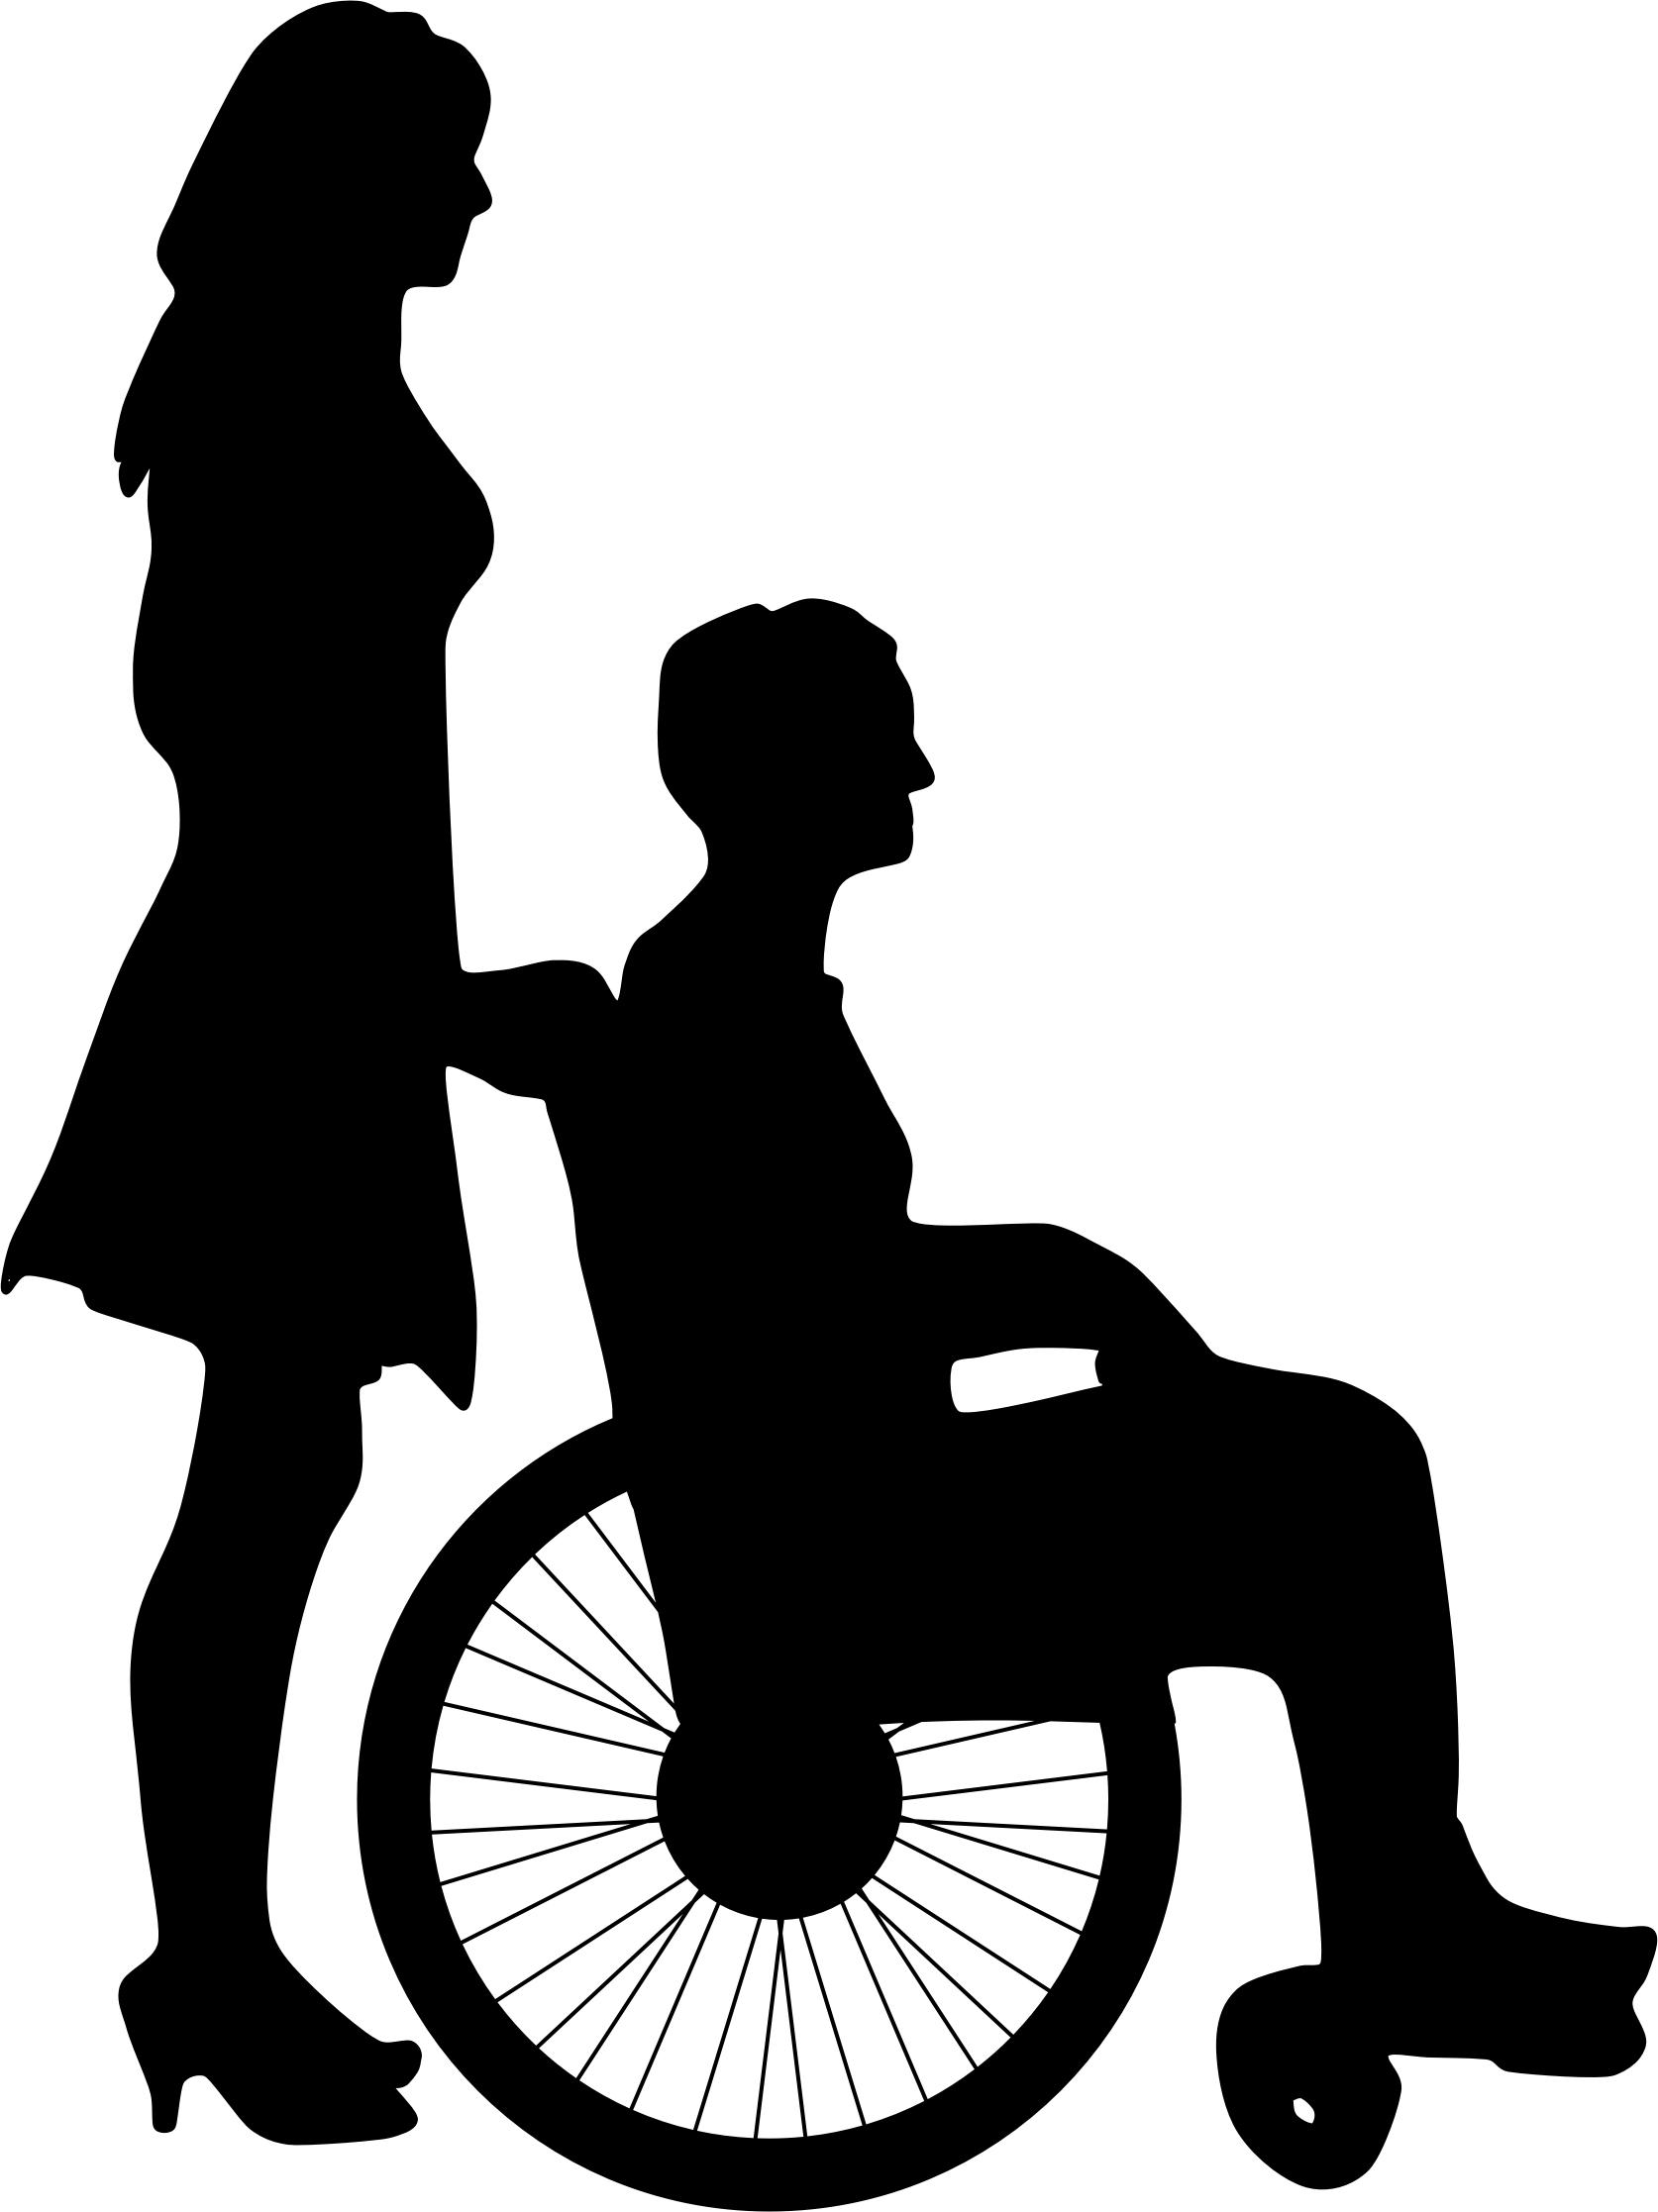 Woman Pushing Man In Wheelchair Silhouette png icons